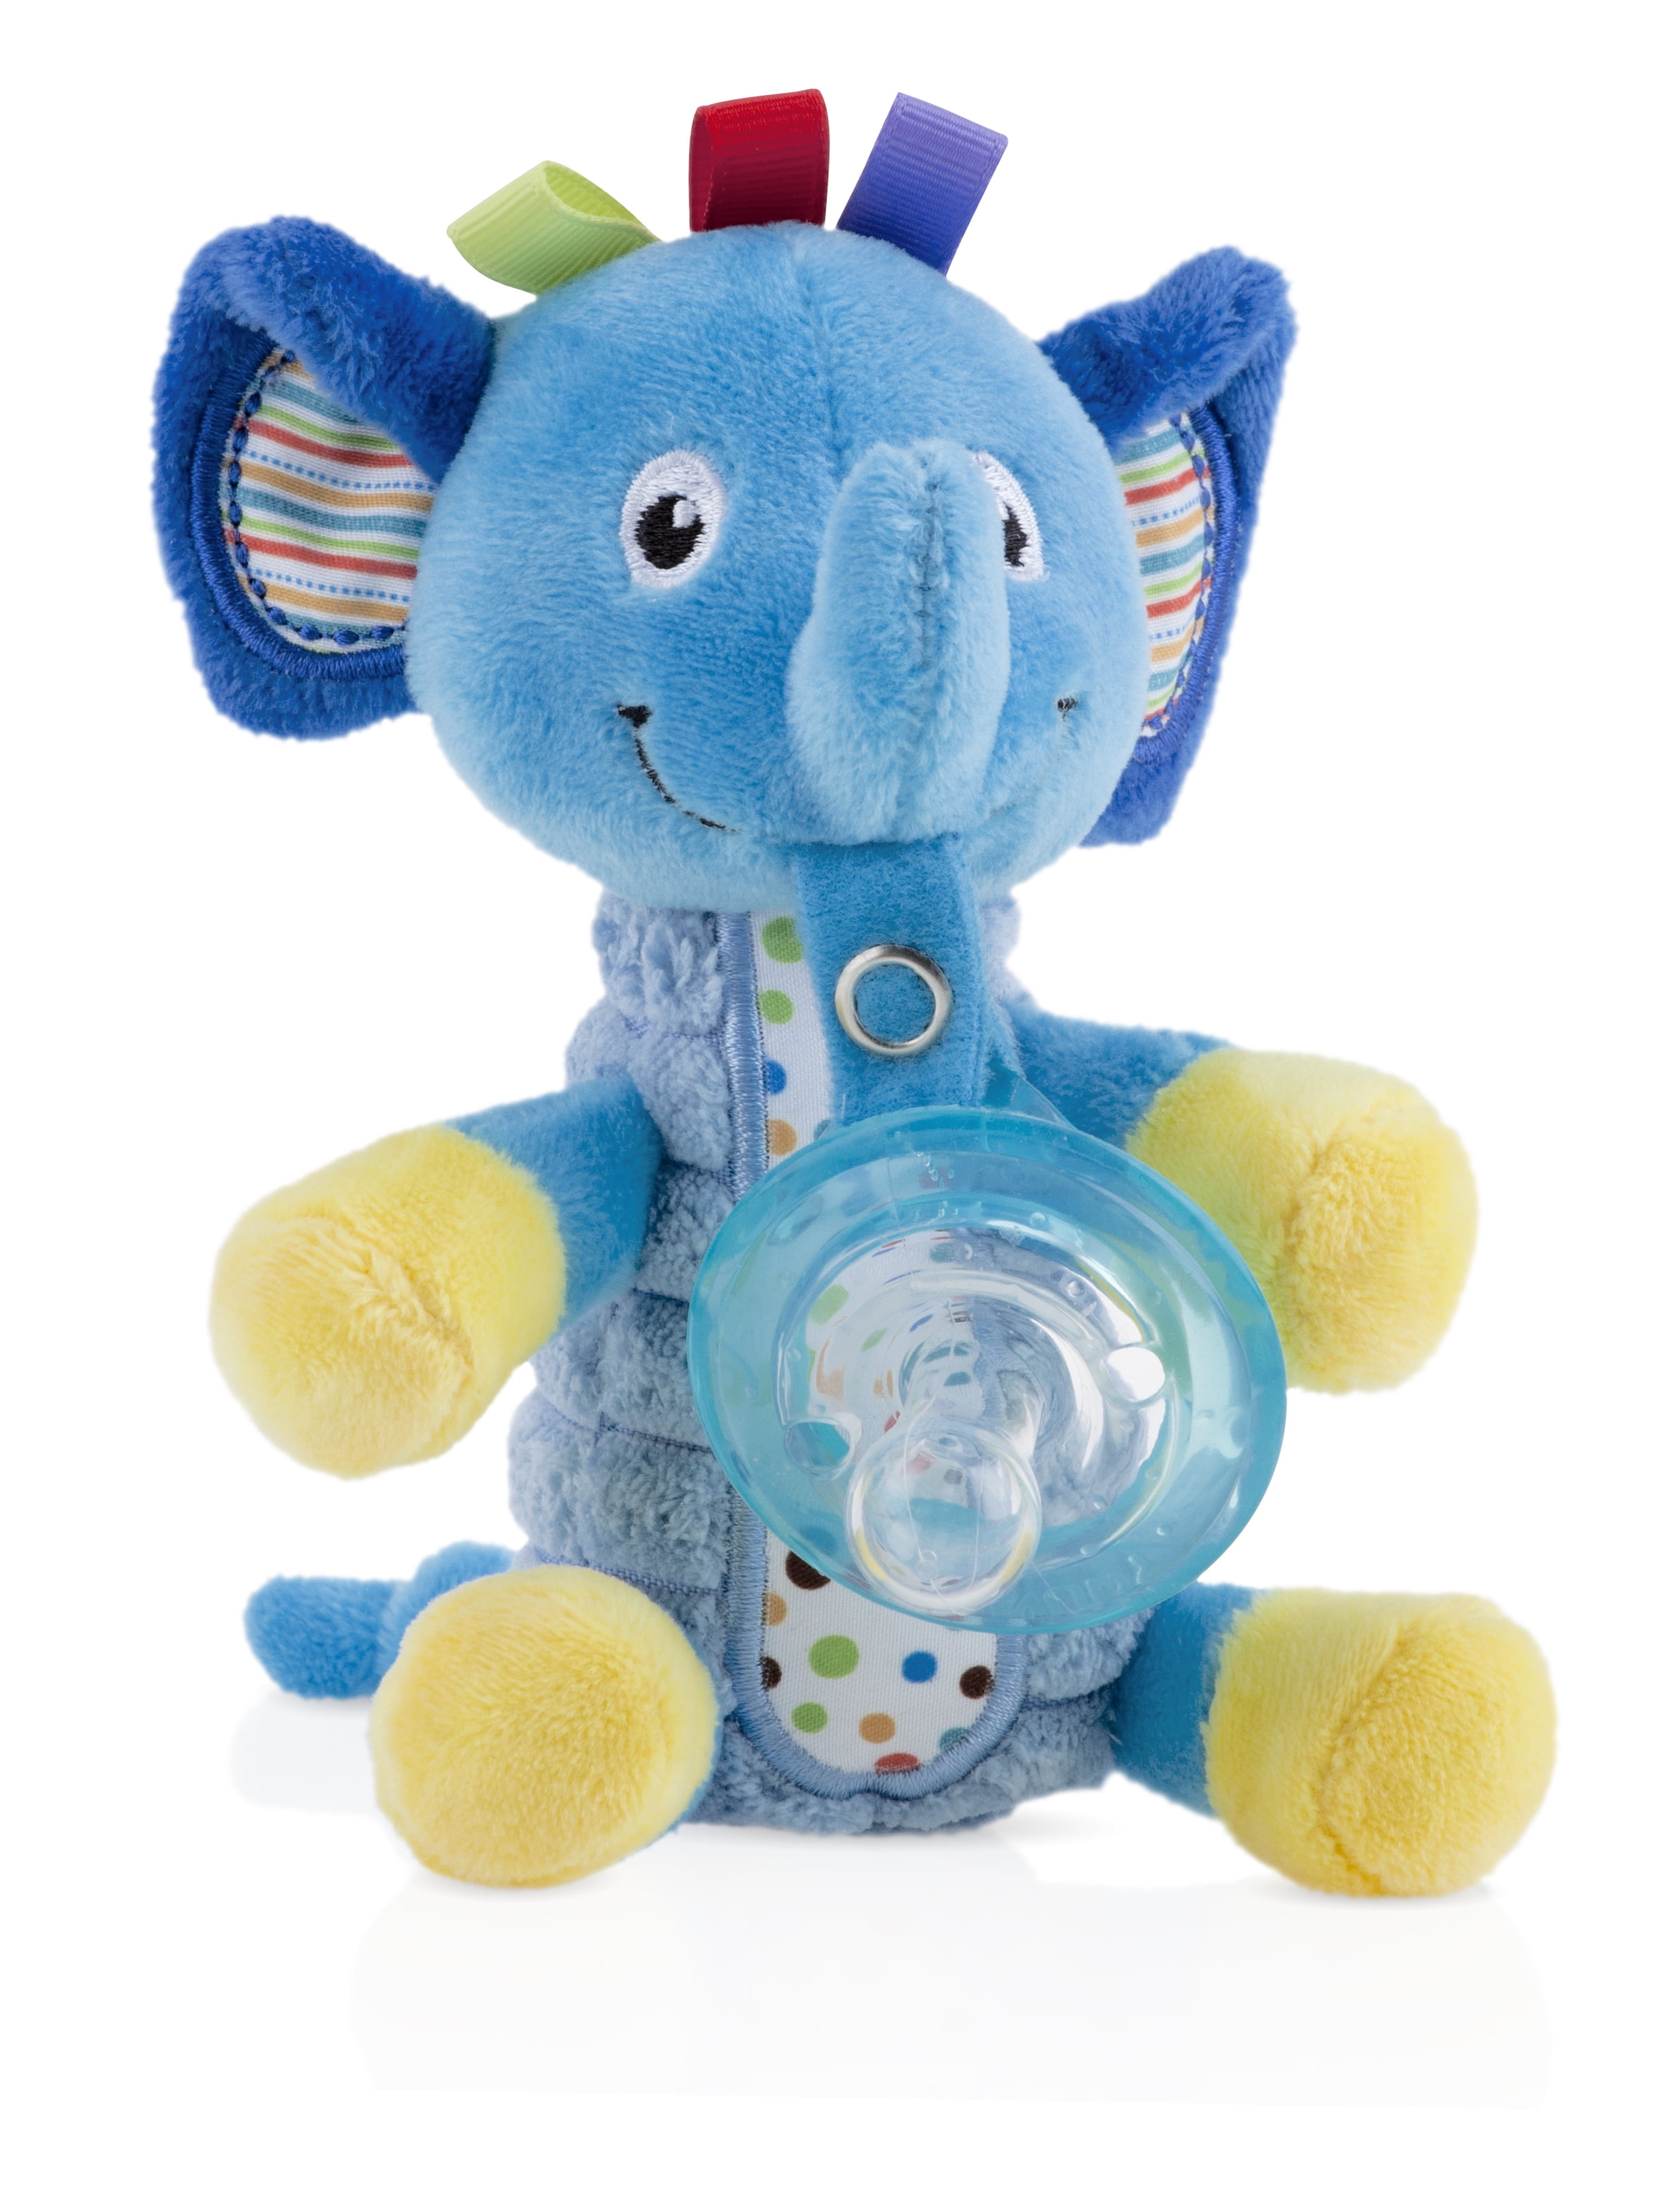 Bryco Baby Elephant Pacifier Holder Includes Detachable Pacifier Tail Clip BPA-Free Silicone Pacifier is Easy to Clean and Dishwasher Safe and Rattle Soft Plush Stuffed Animal Toys for Infants